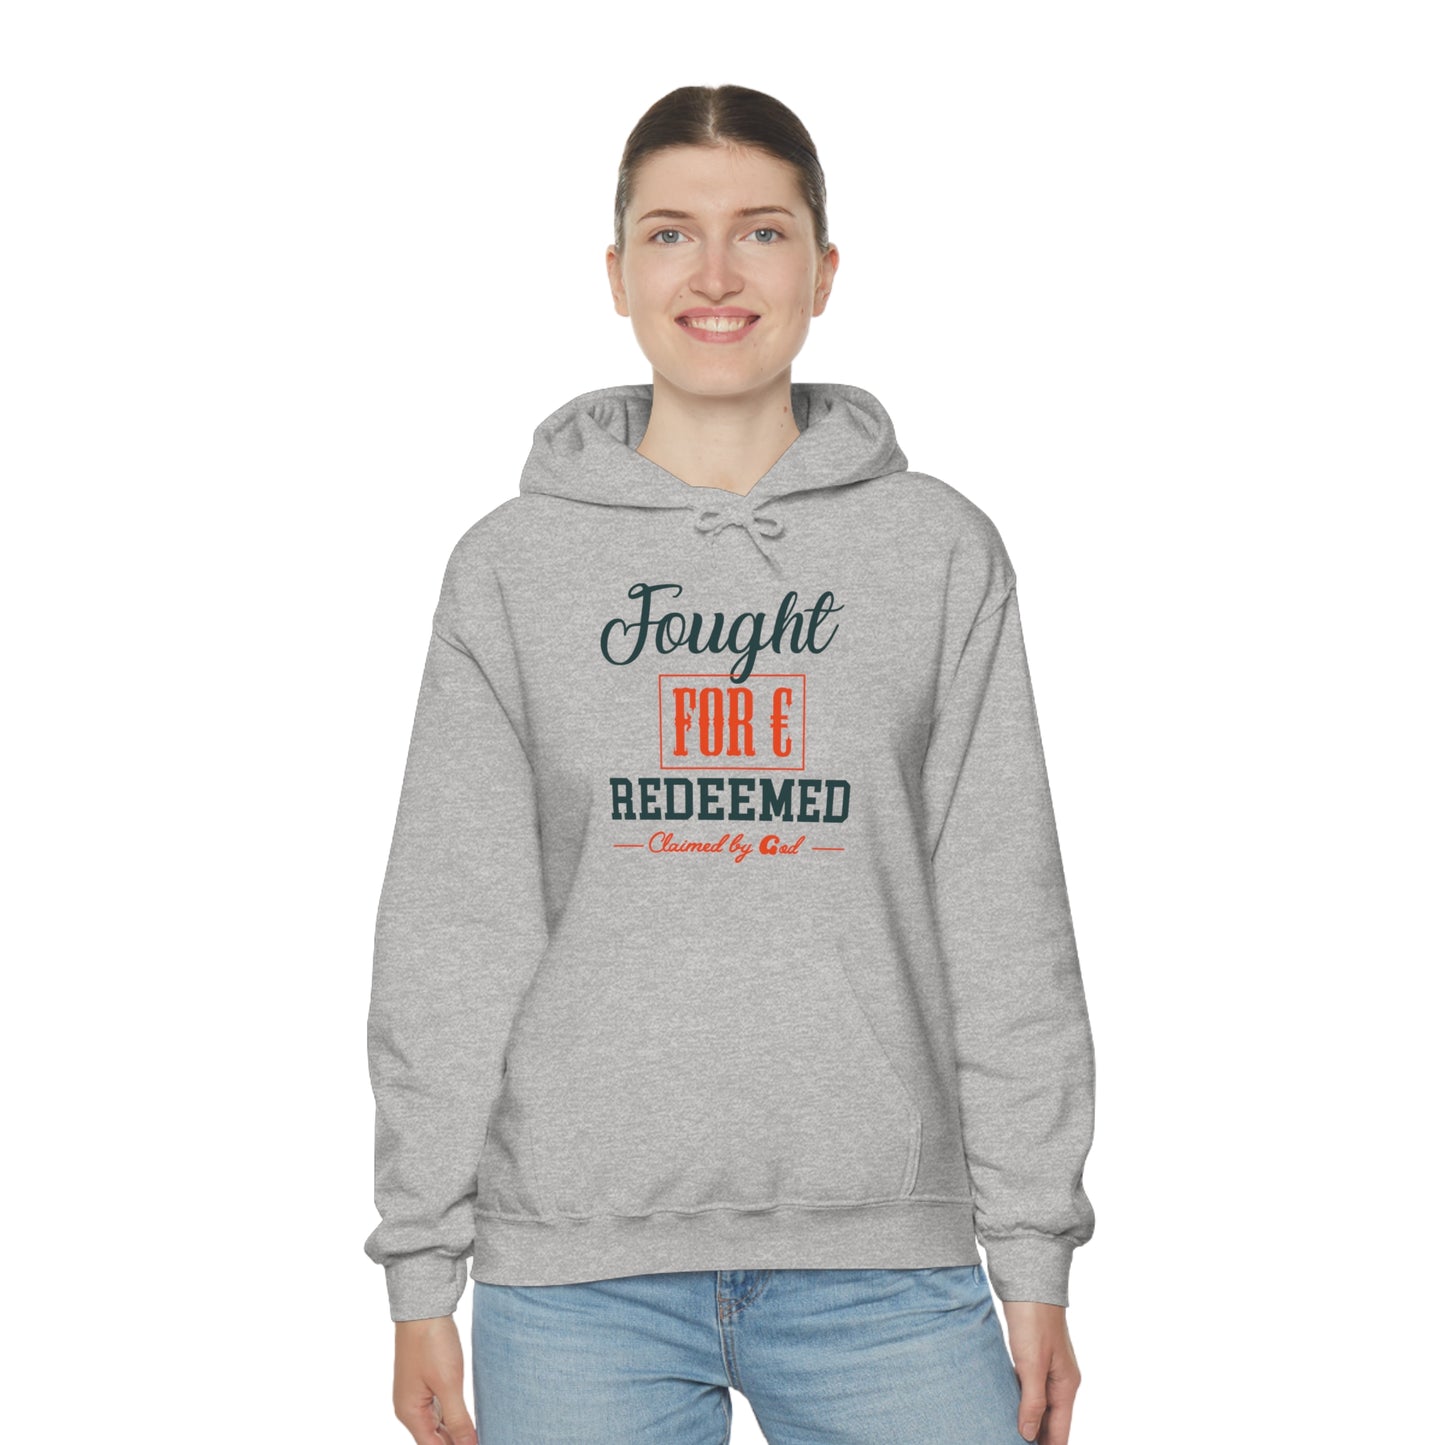 Fought For and Redeemed Unisex Hooded Sweatshirt